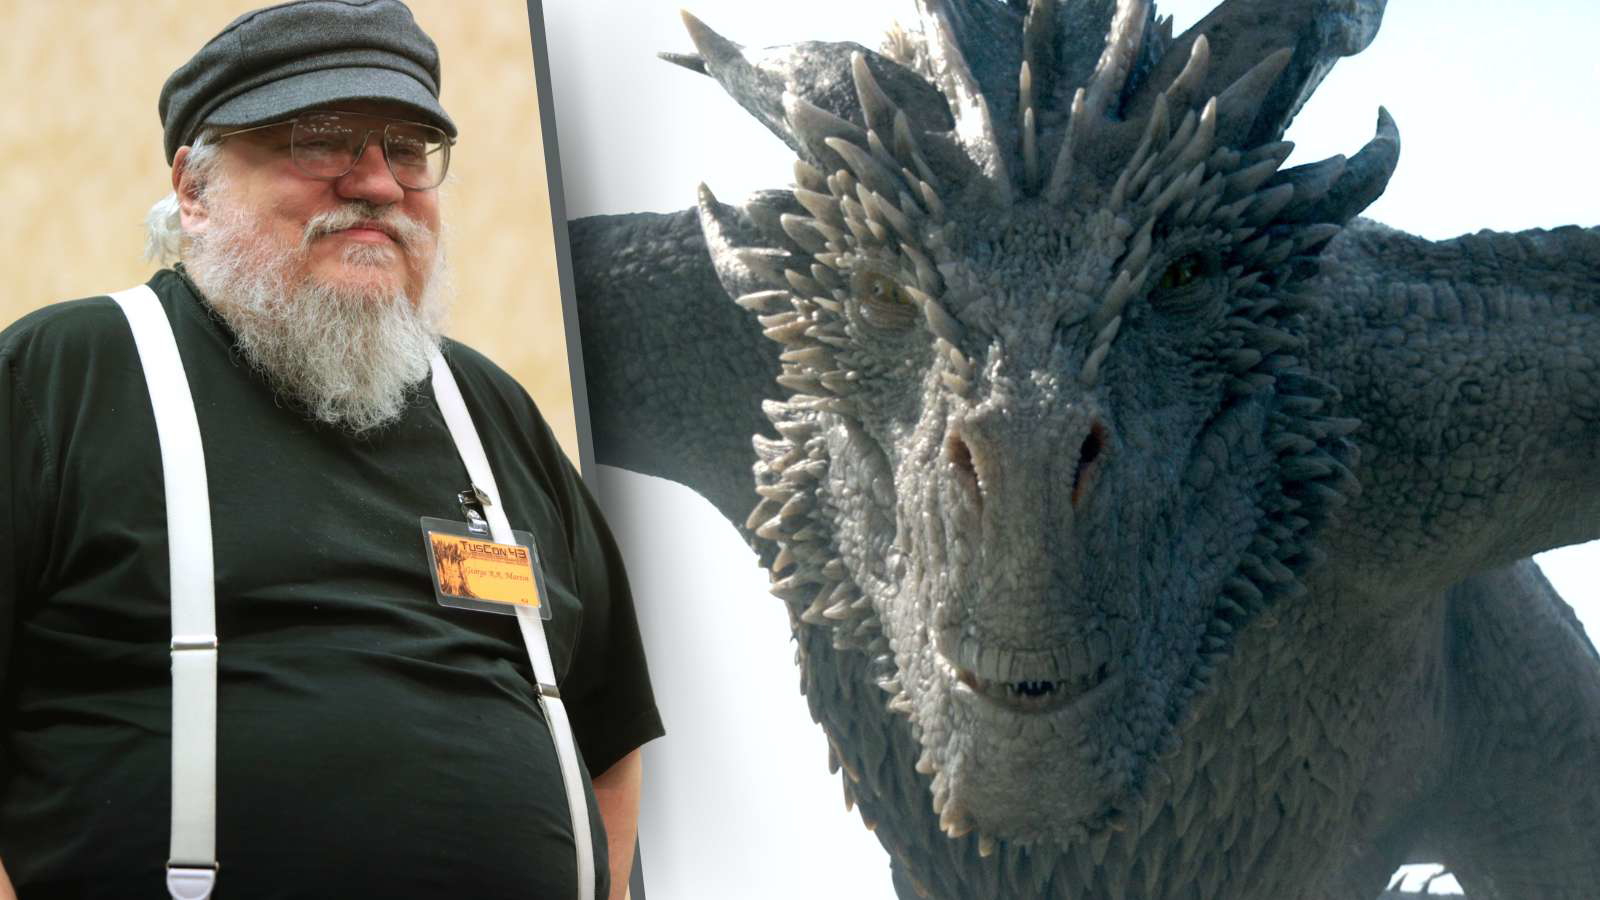 House of the Dragon Season 2 May Have Filled a Giant Hole George R.R. Martin Left in ‘Fire & Blood’ With its Wild Seasmoke Twist